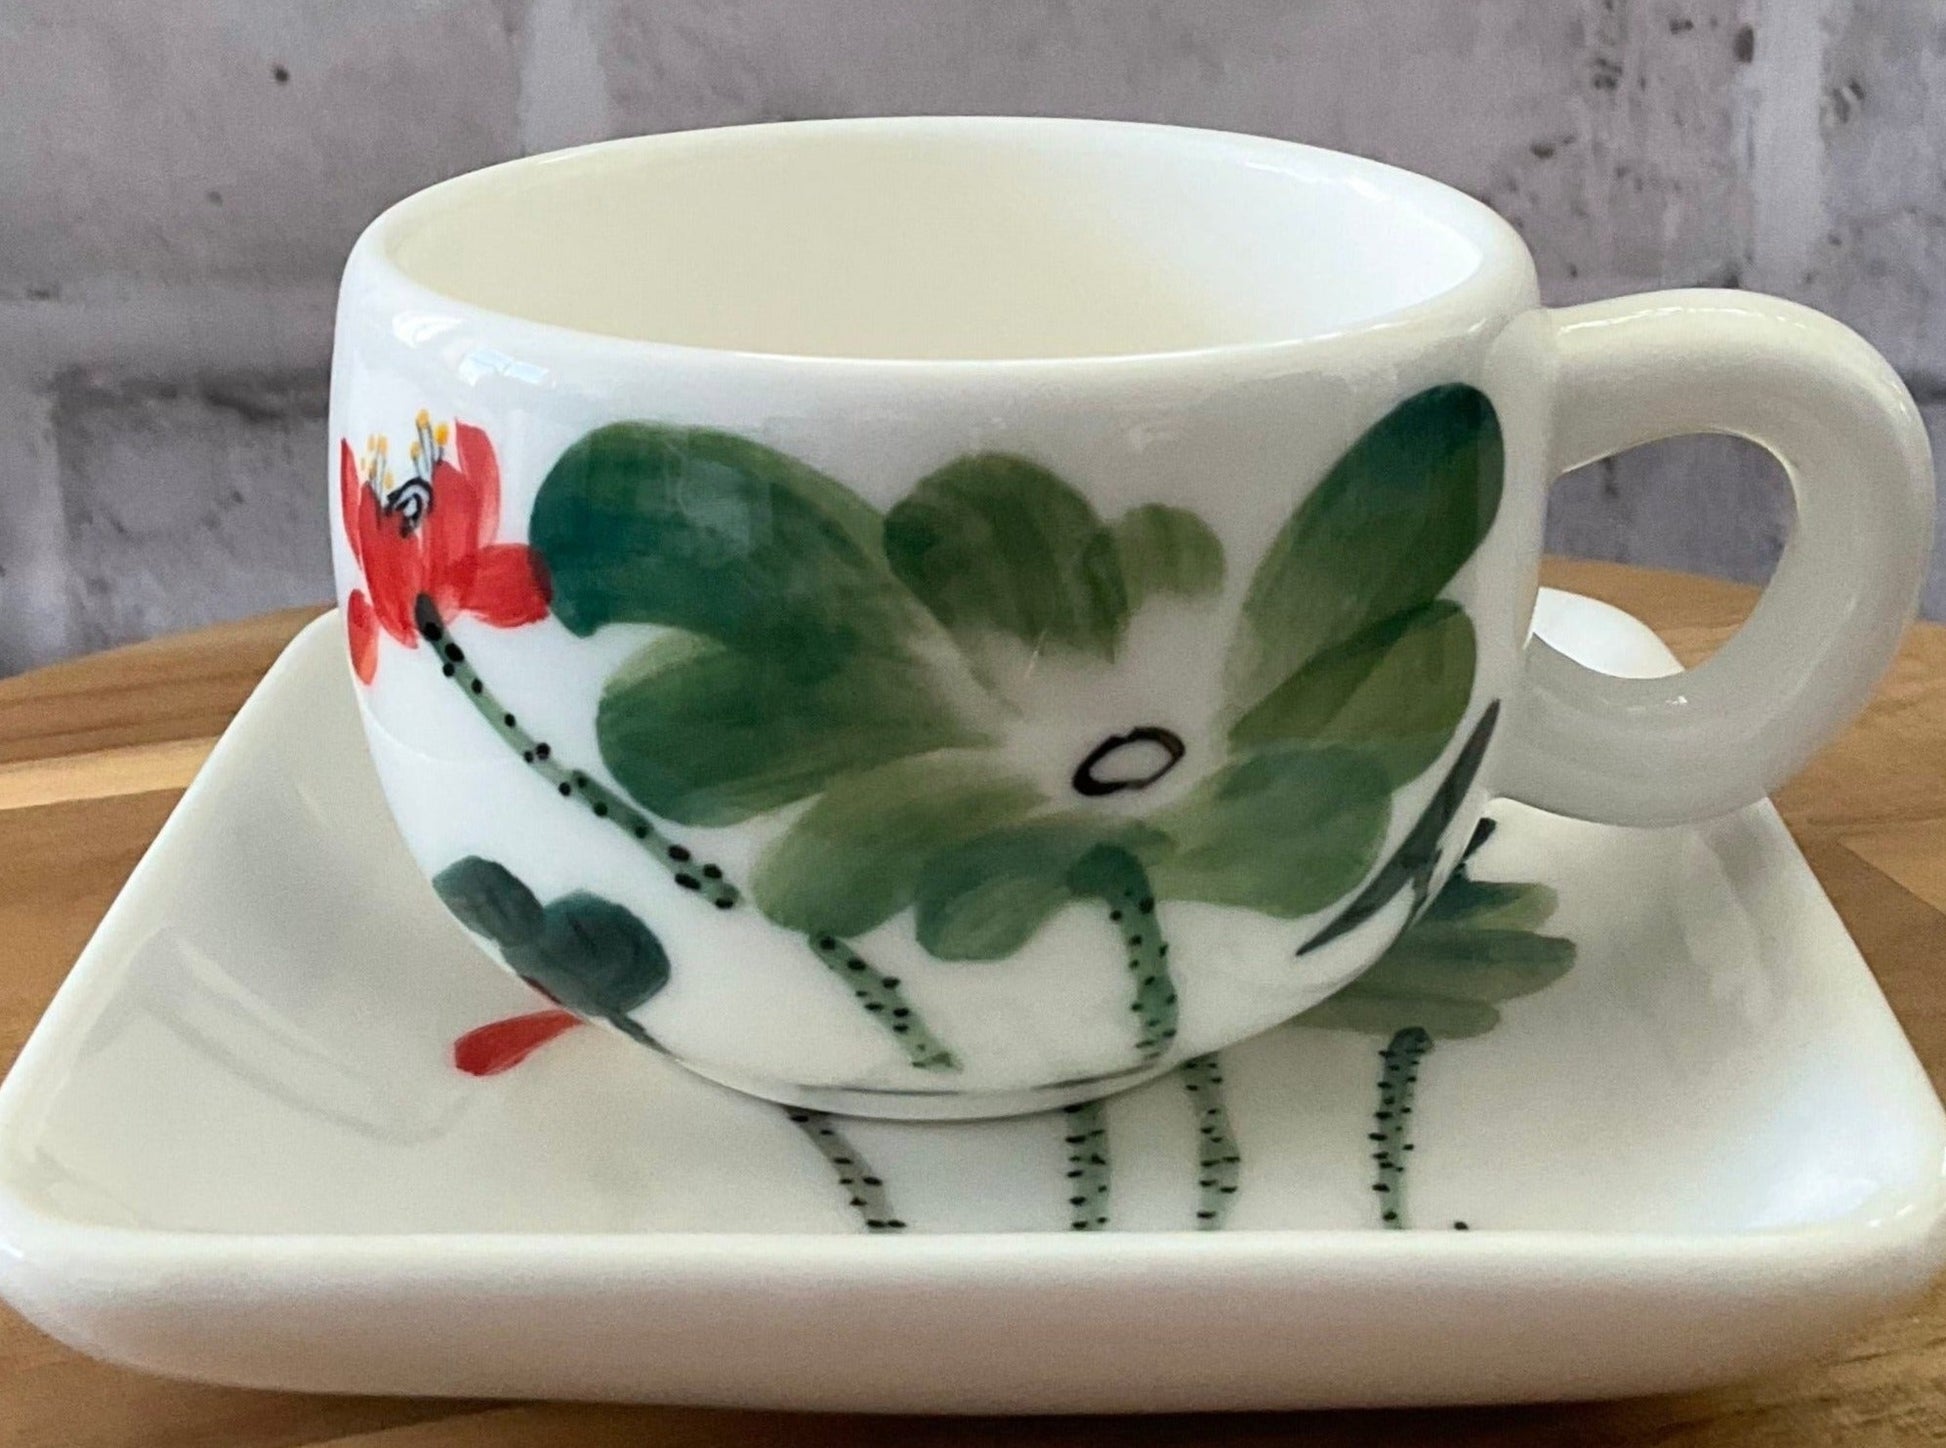 A Watercolor Painting Waterlily Latte Cup with Square Shaped Saucer, Perfect for Tea as well as Coffee Latte